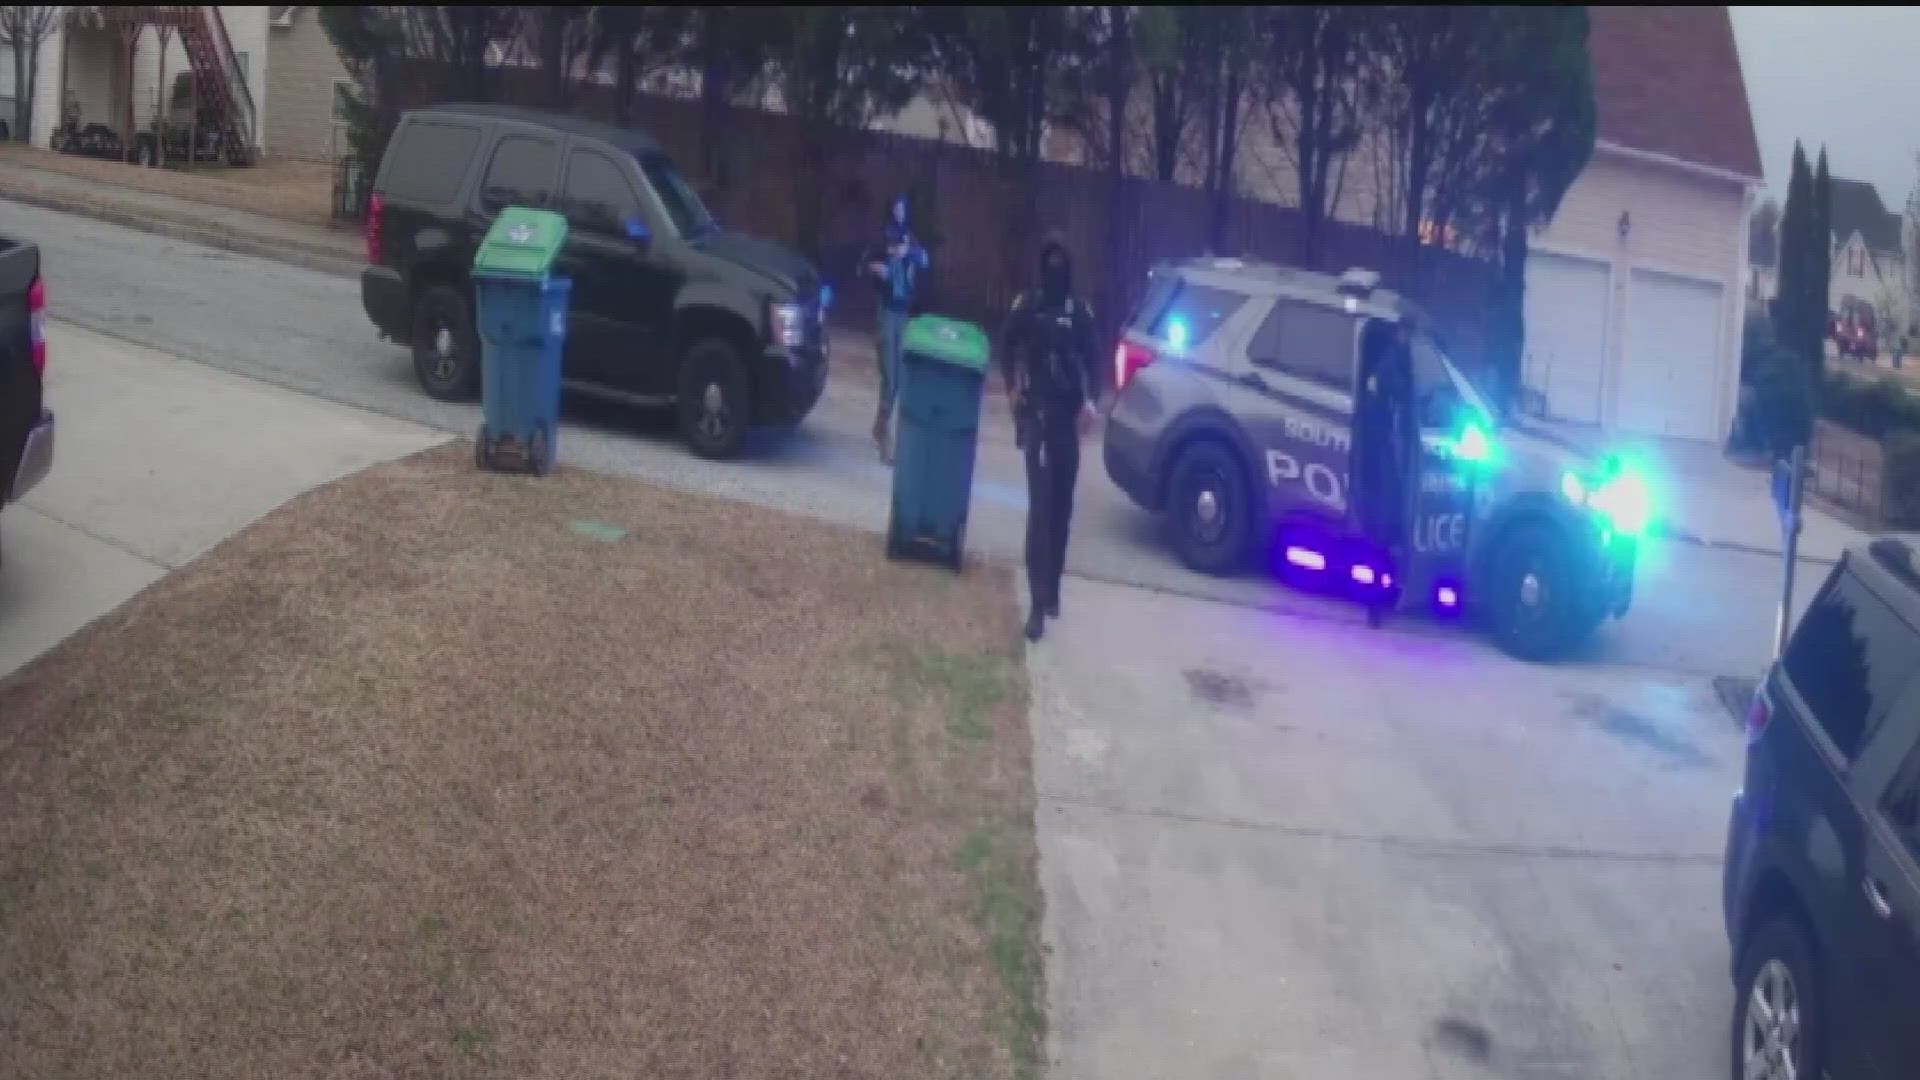 A woman said police wrongly held her at gunpoint while she was trying to get her kids ready for school.